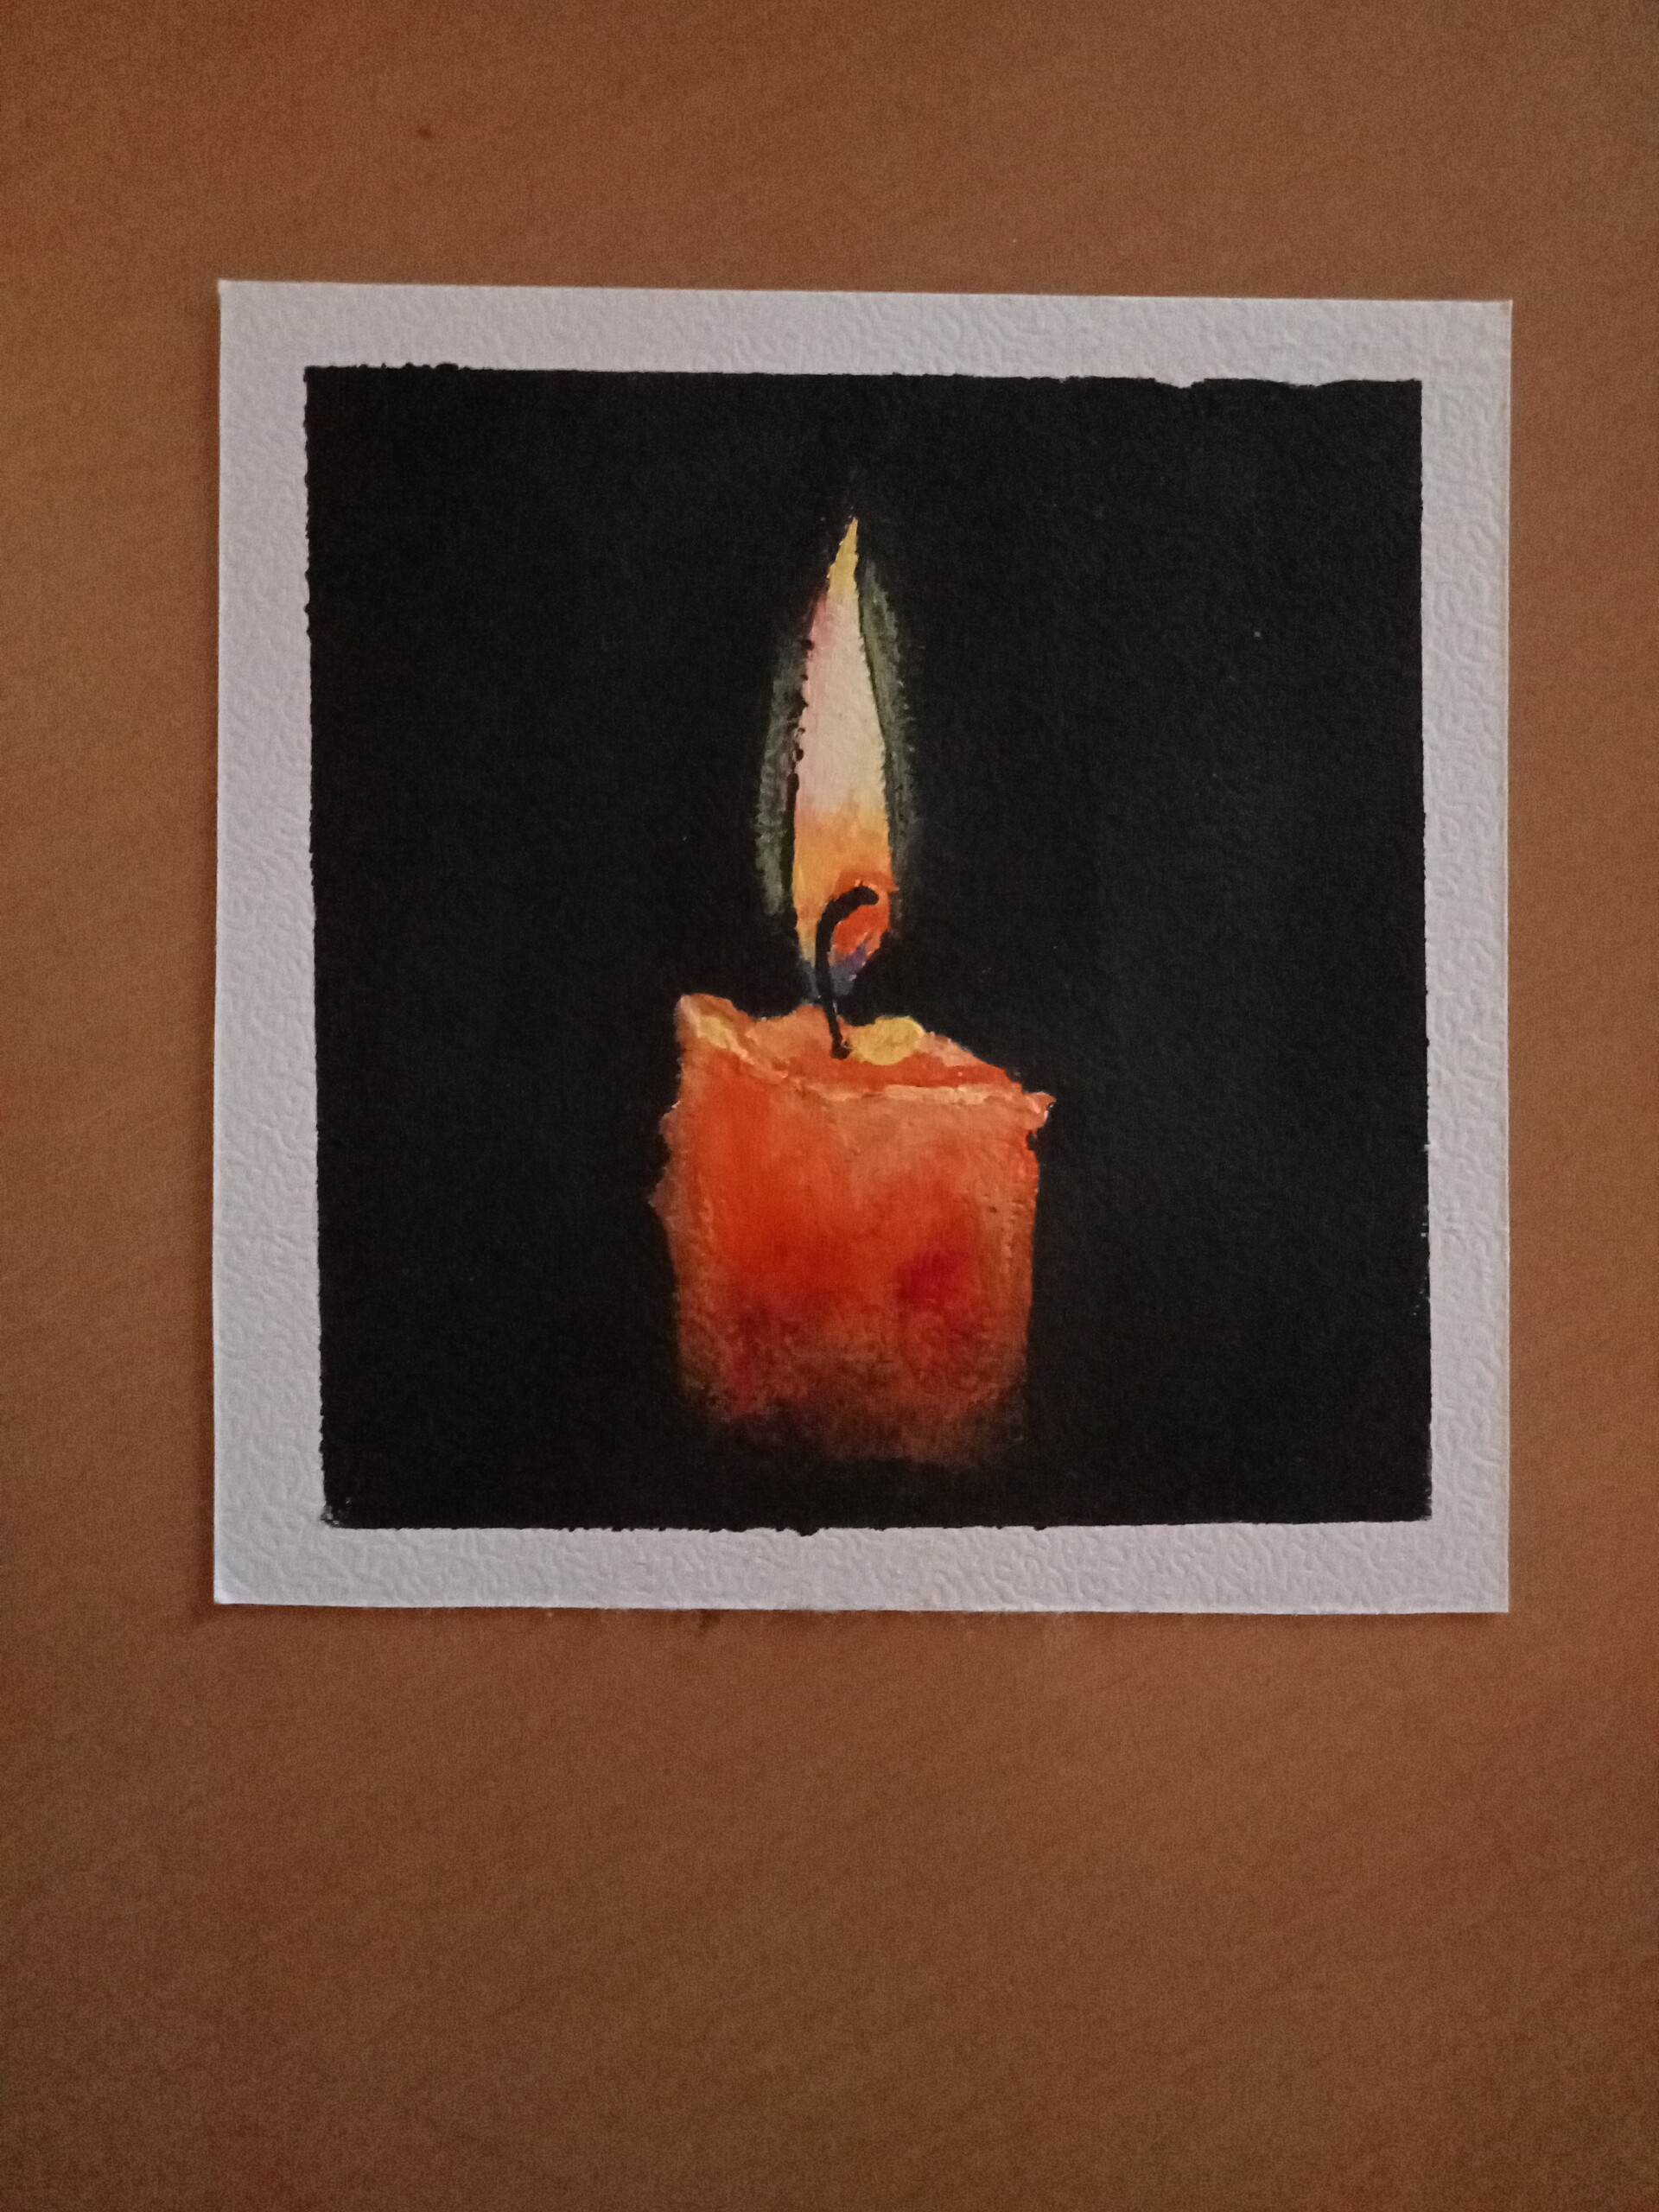 Paint a candle - process by Olgola on DeviantArt